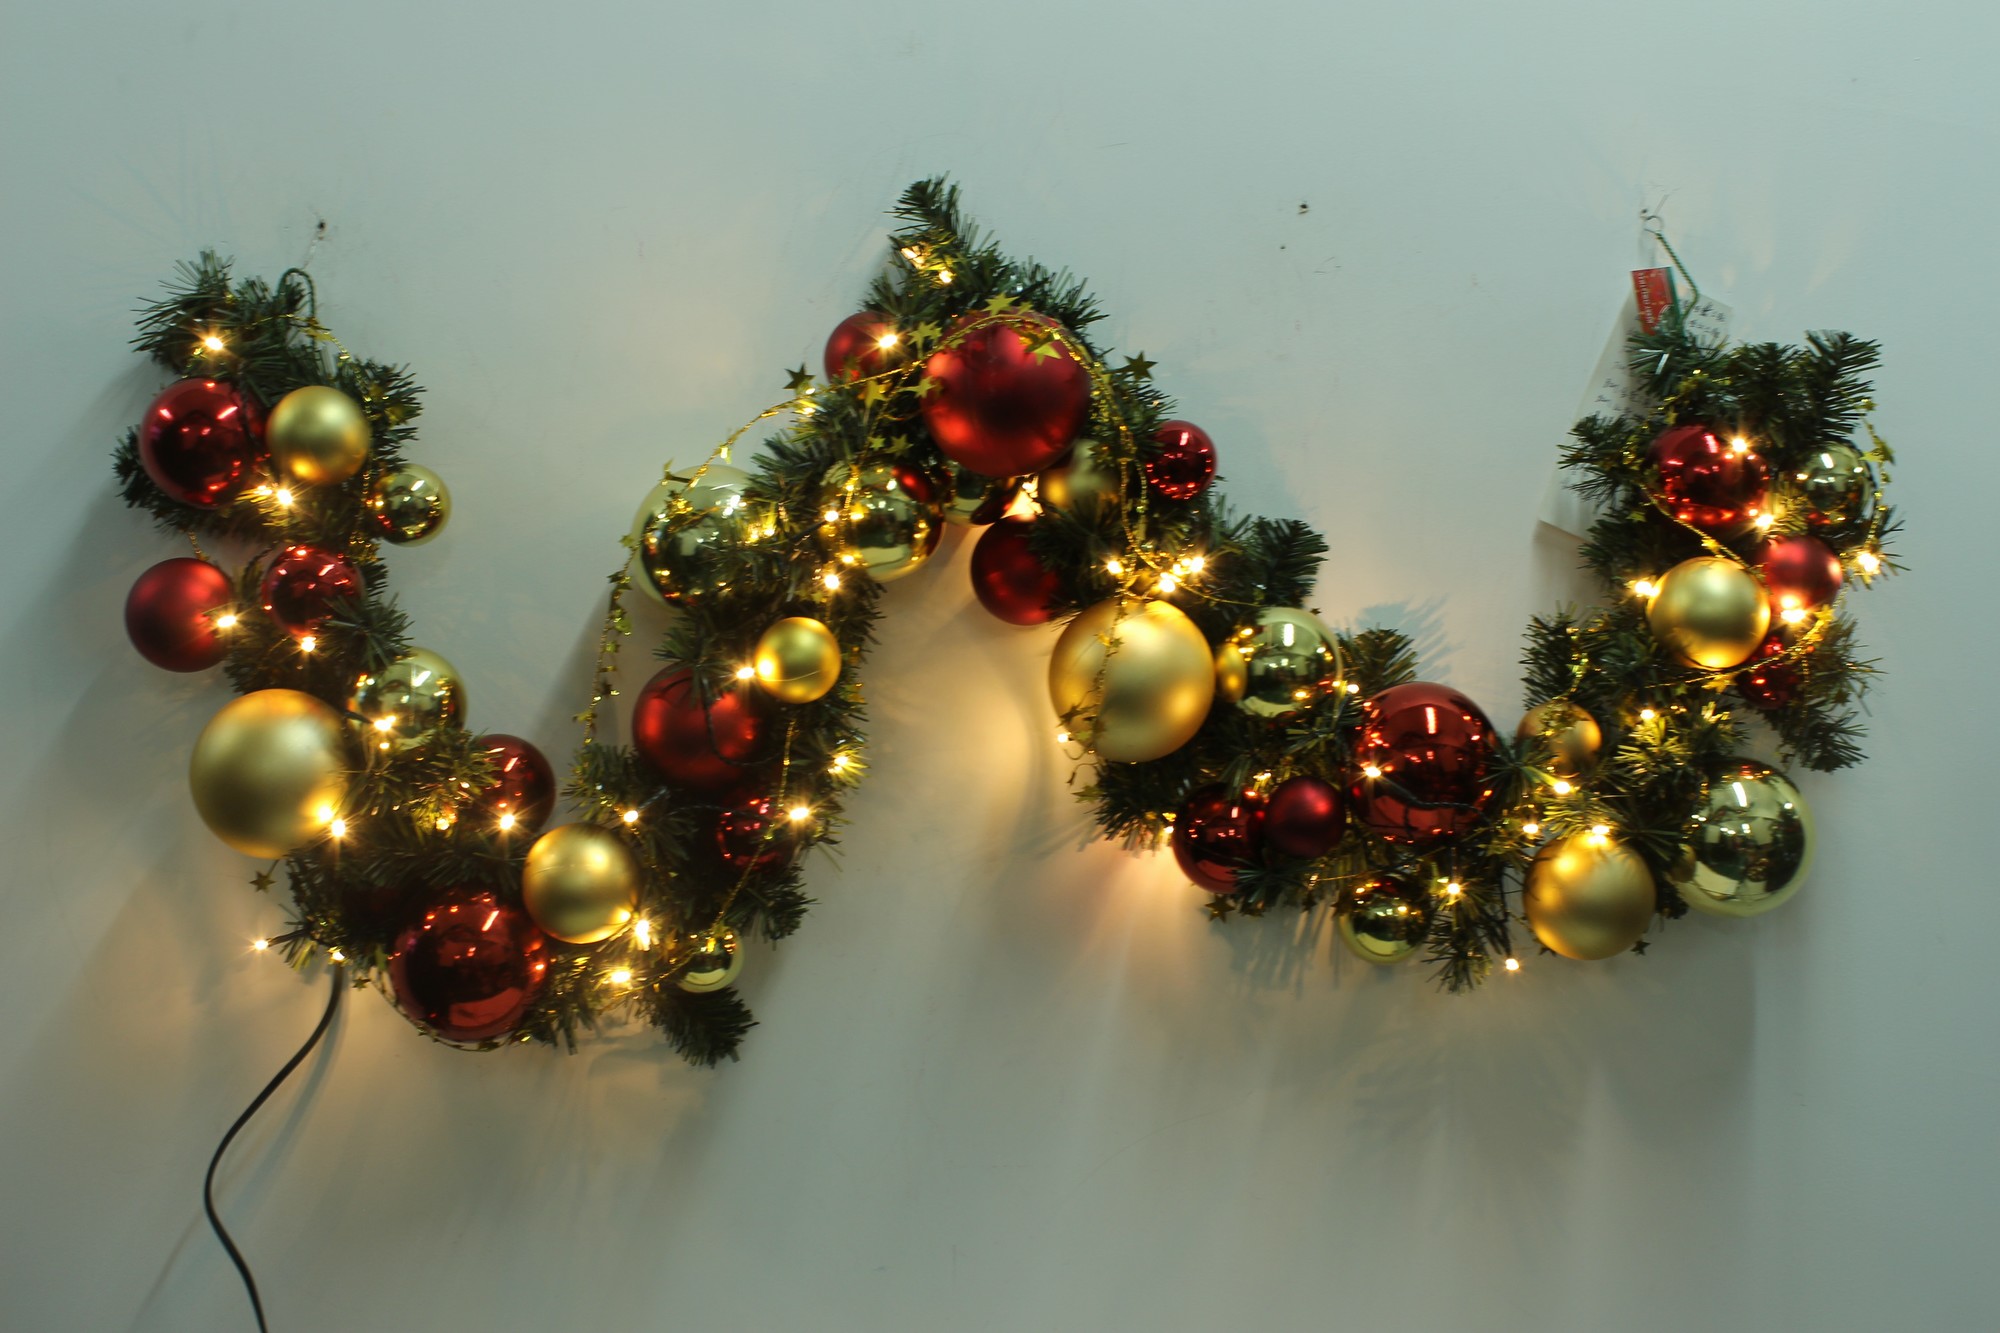 Decorated Christmas Garland With Lights 